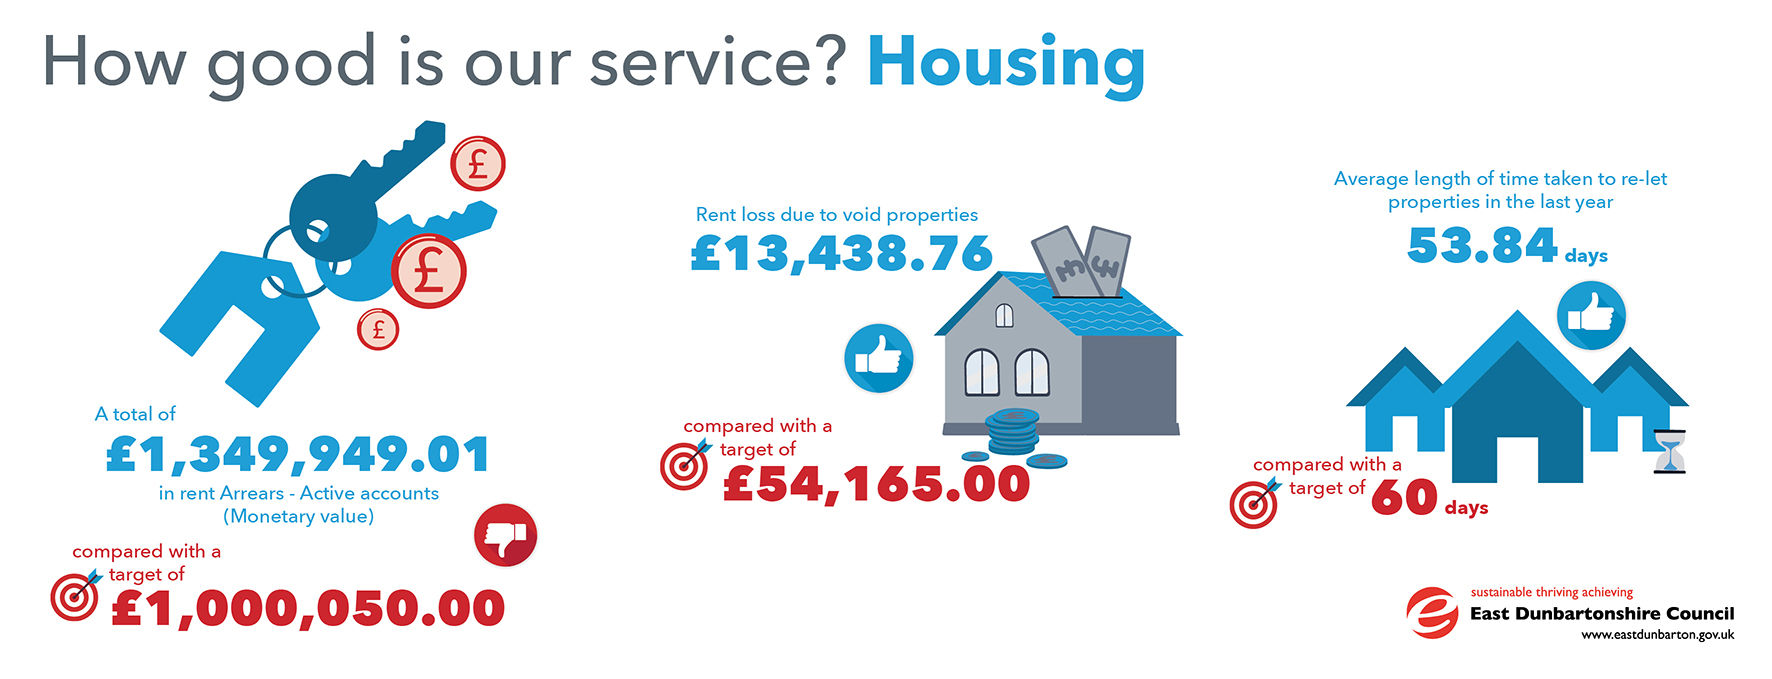 infographic showing statistics for housing